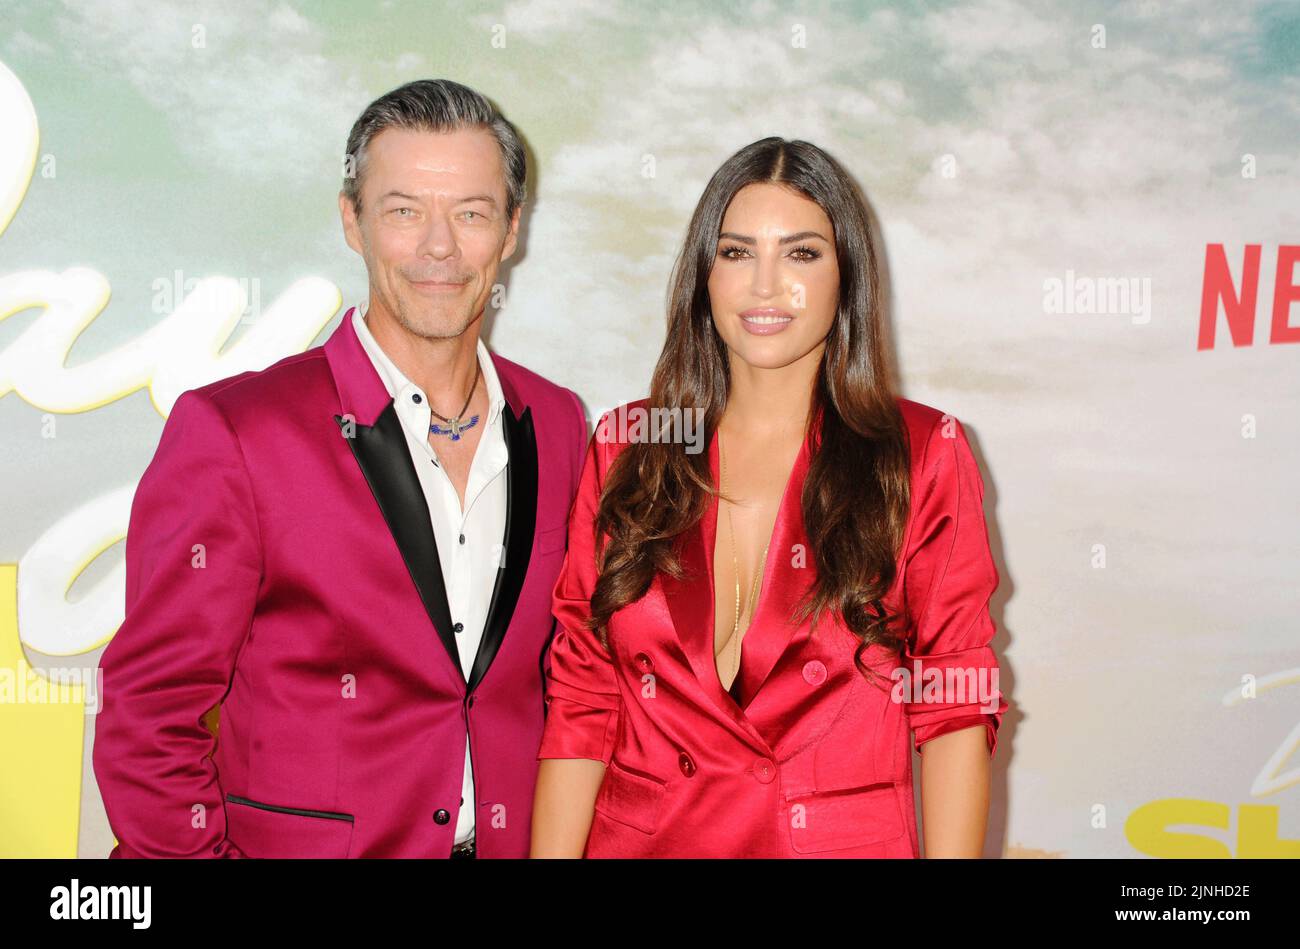 LOS ANGELES, CA - AUGUST 10: (L-R) Massi Furlan and Yolanthe Sneijder-Cabau attend the World Premiere of Netflix's 'Day Shift' at Regal LA Live on Aug Stock Photo